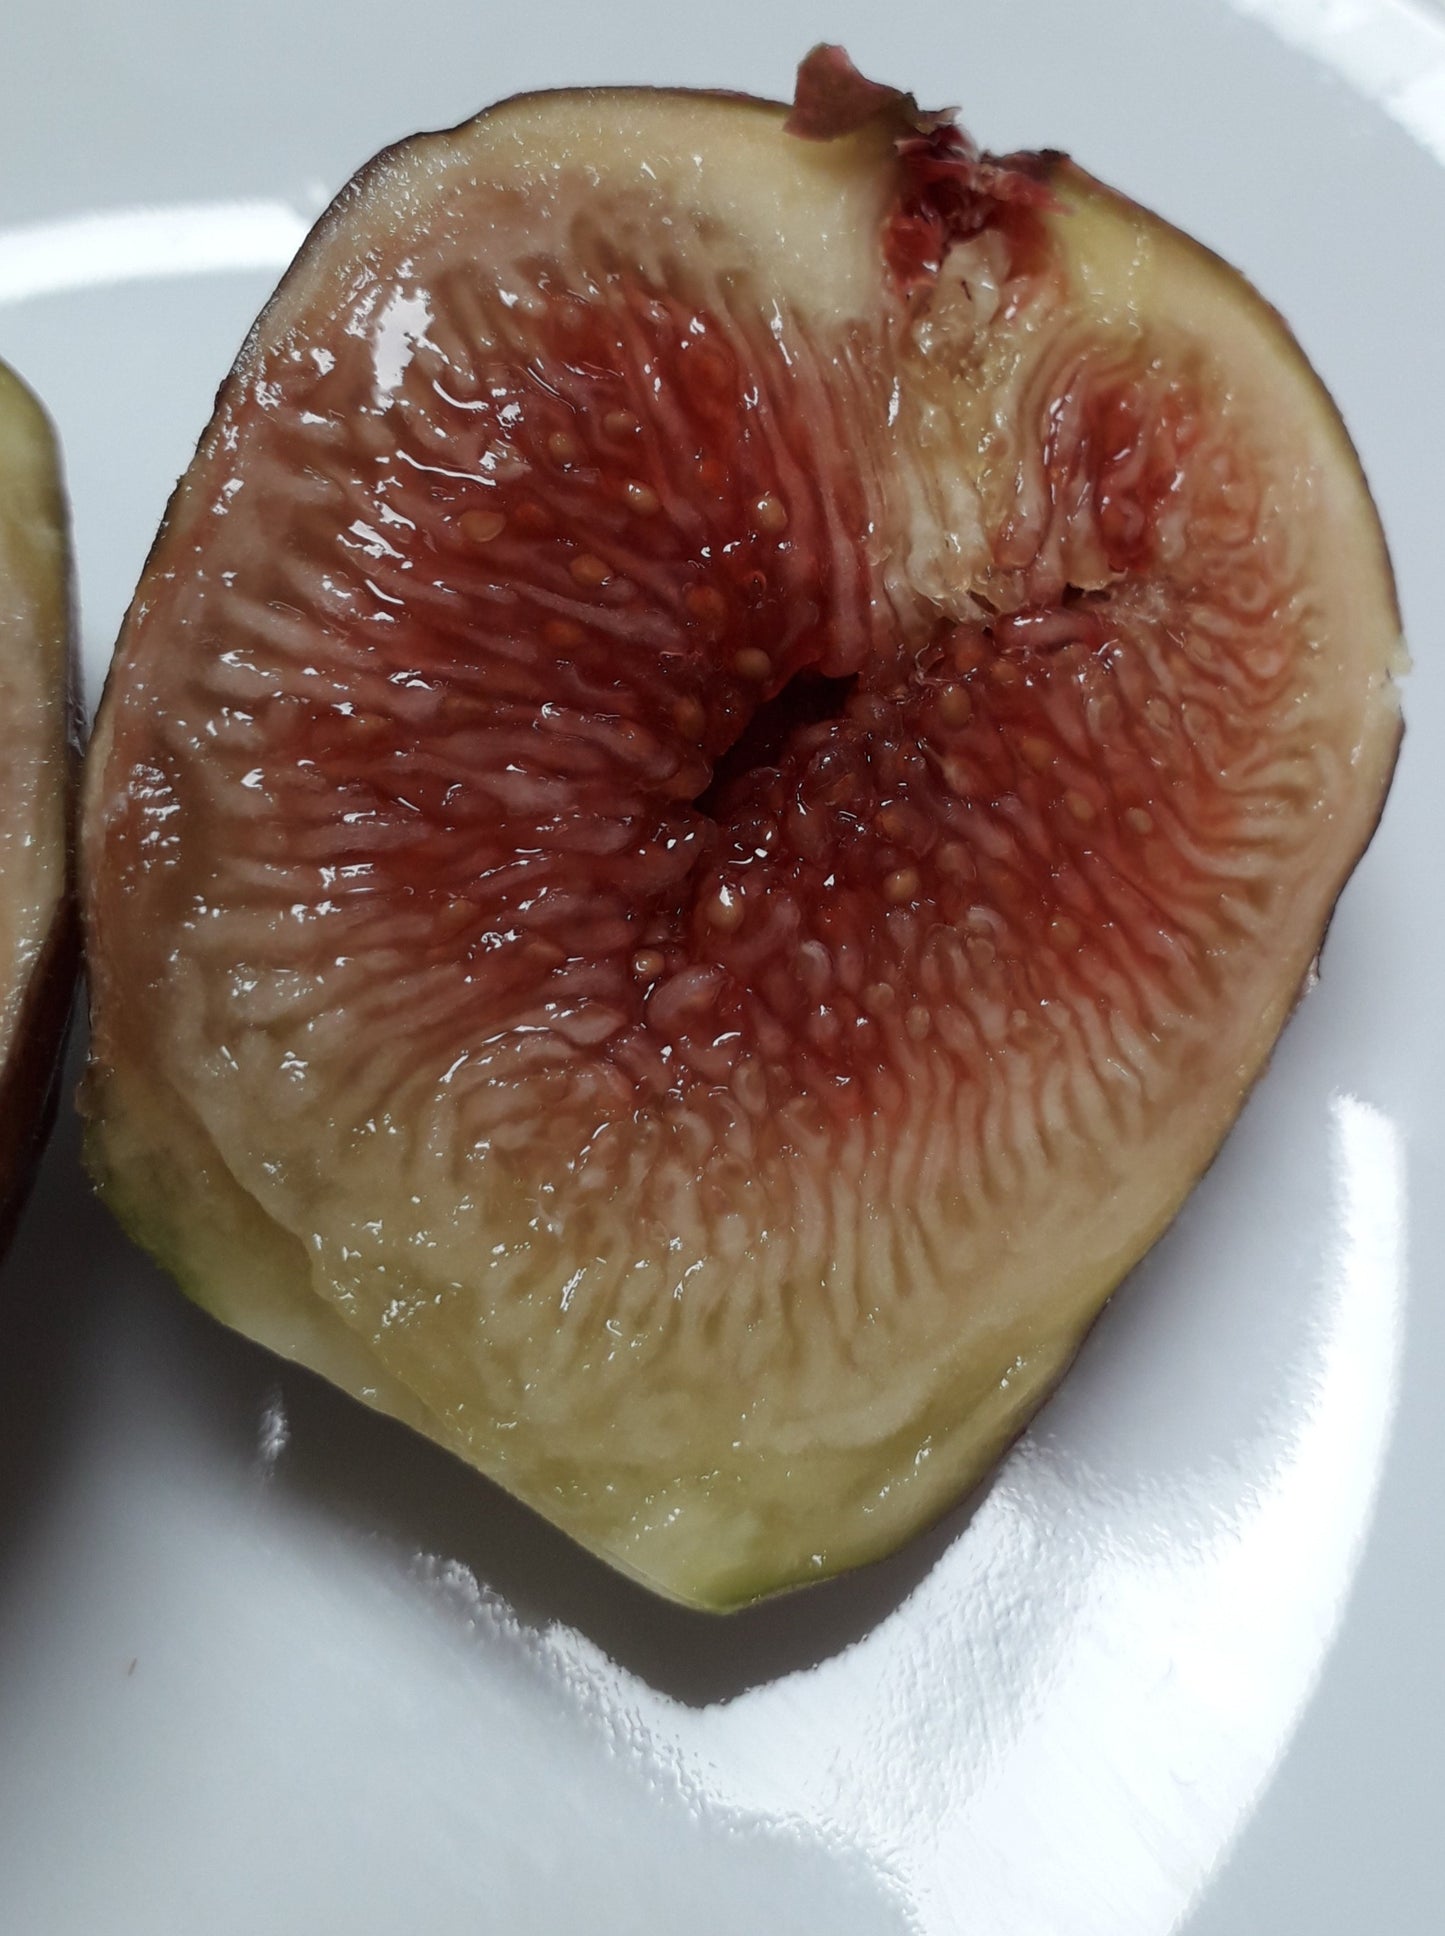 Olympian Fig Tree - 2 Cuttings - Early and Cold Hardy - Tasty Sugar Figs